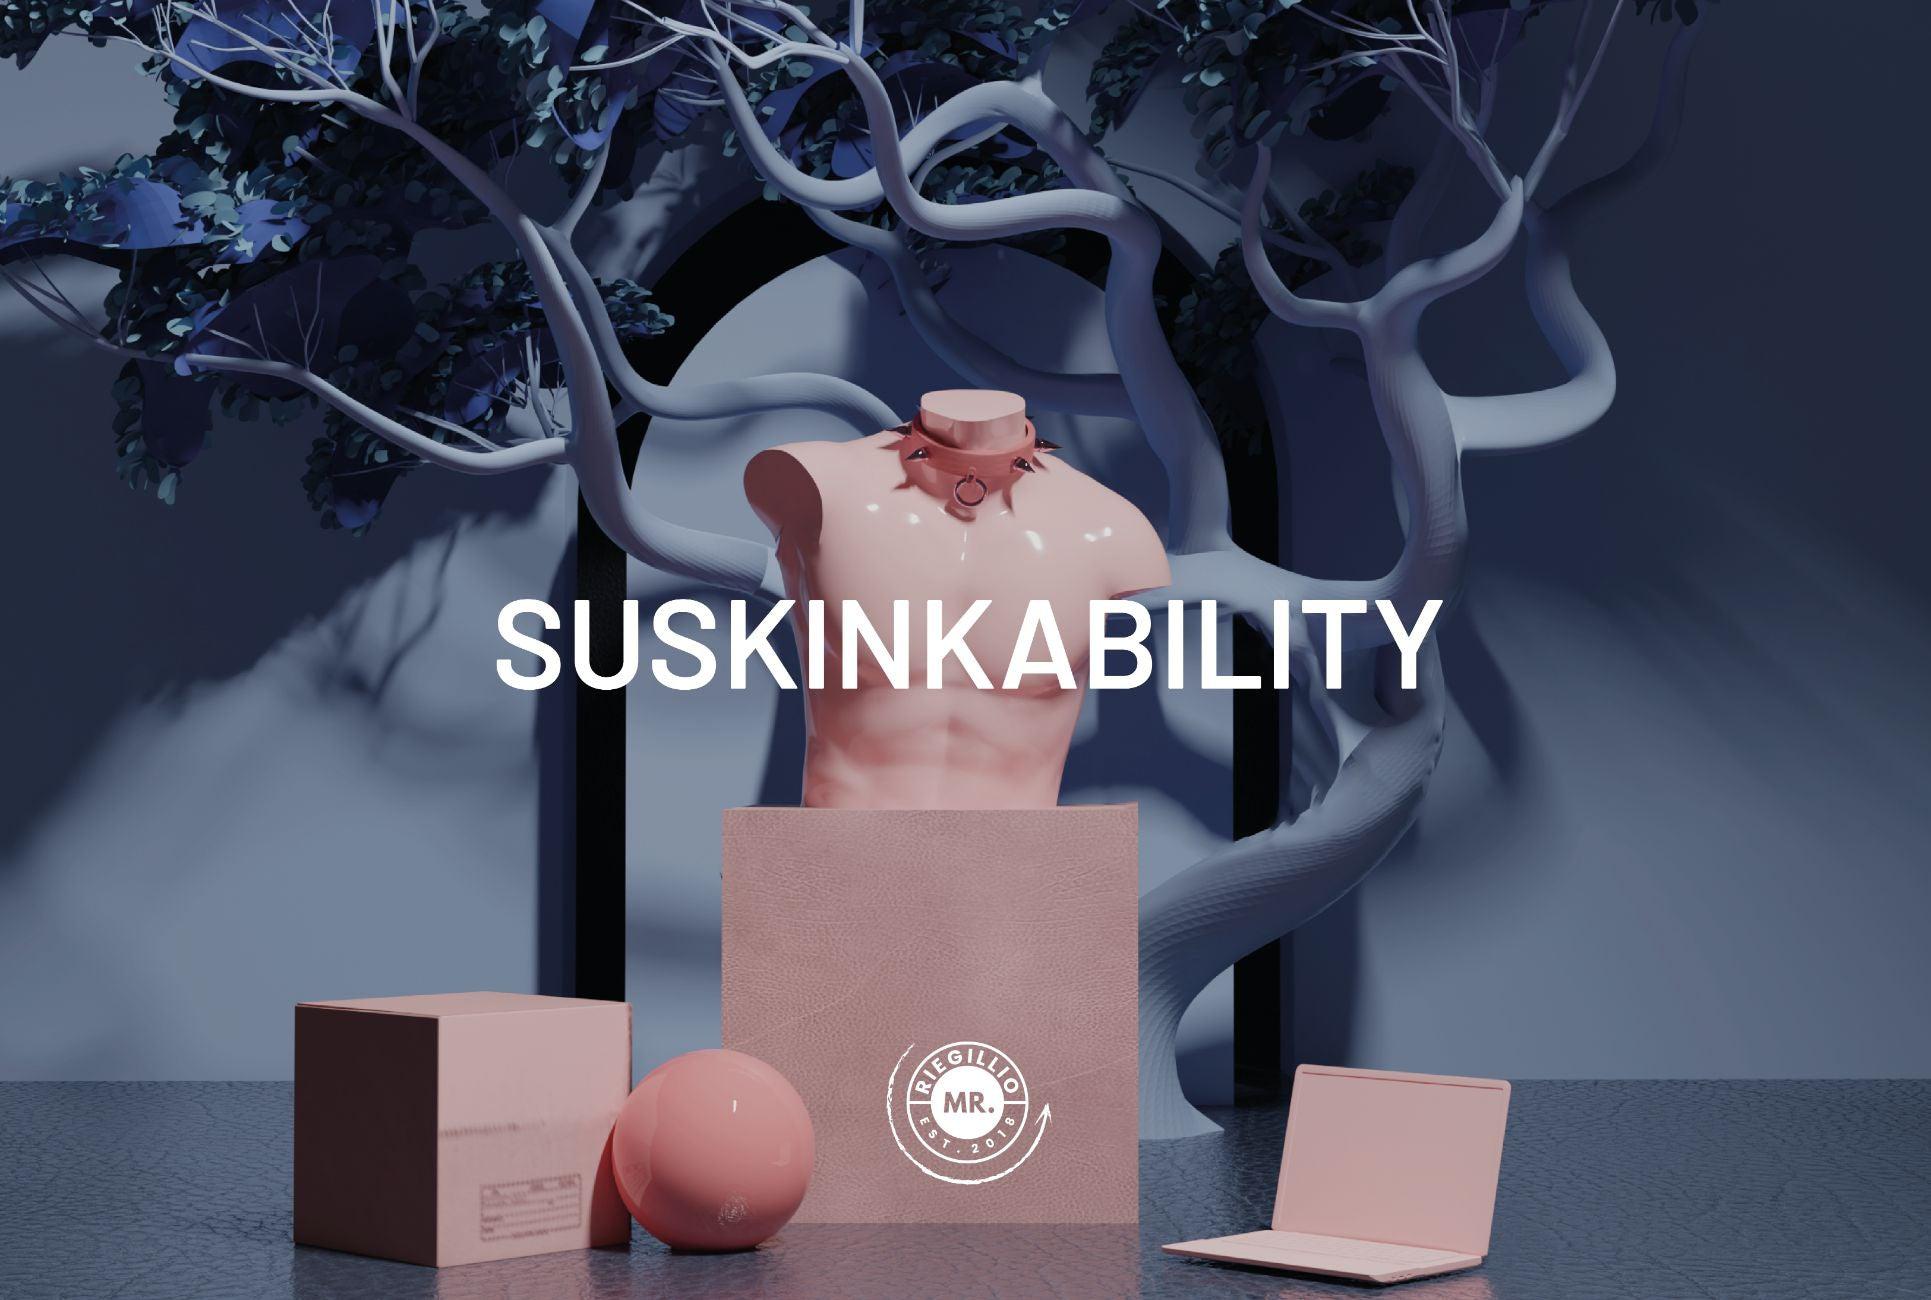 It's World Earth Day - Time to be suskinkable!